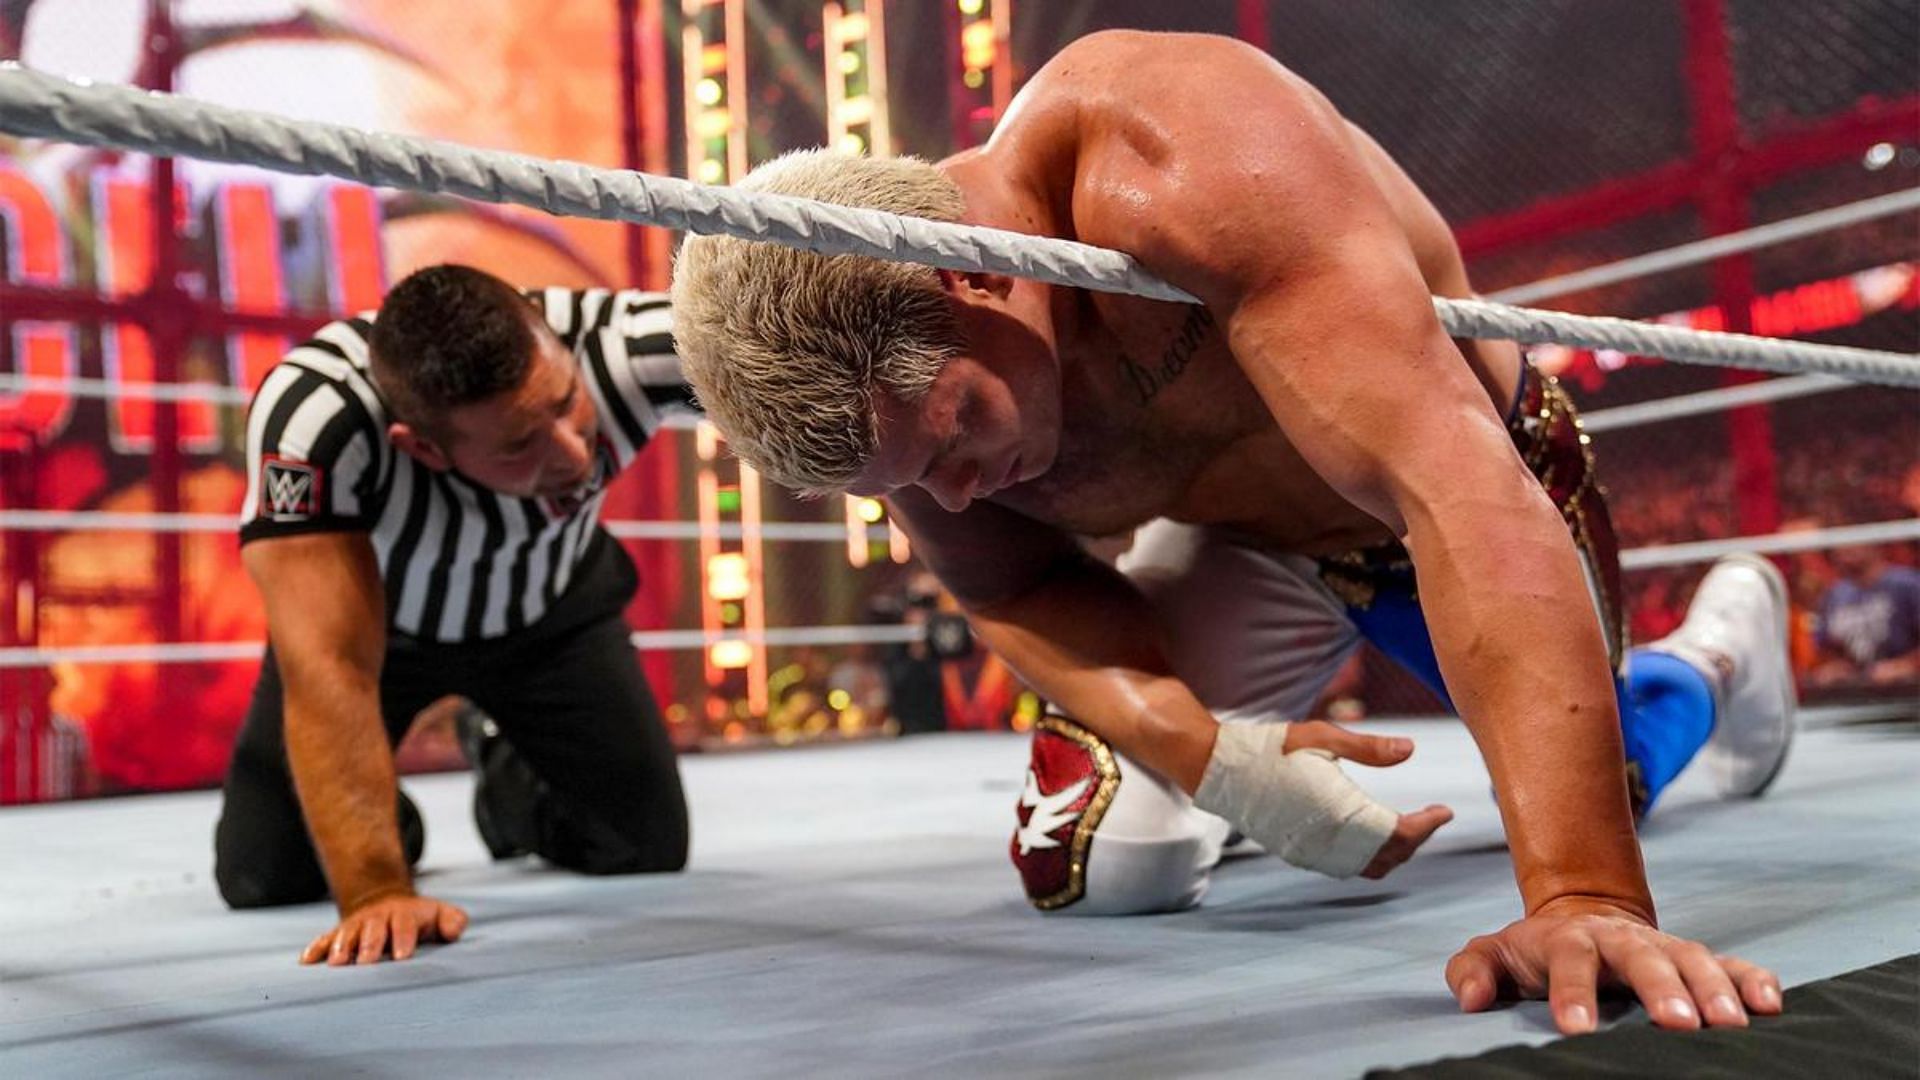 Cody Rhodes is suffering from a partially torn pectoral injury.